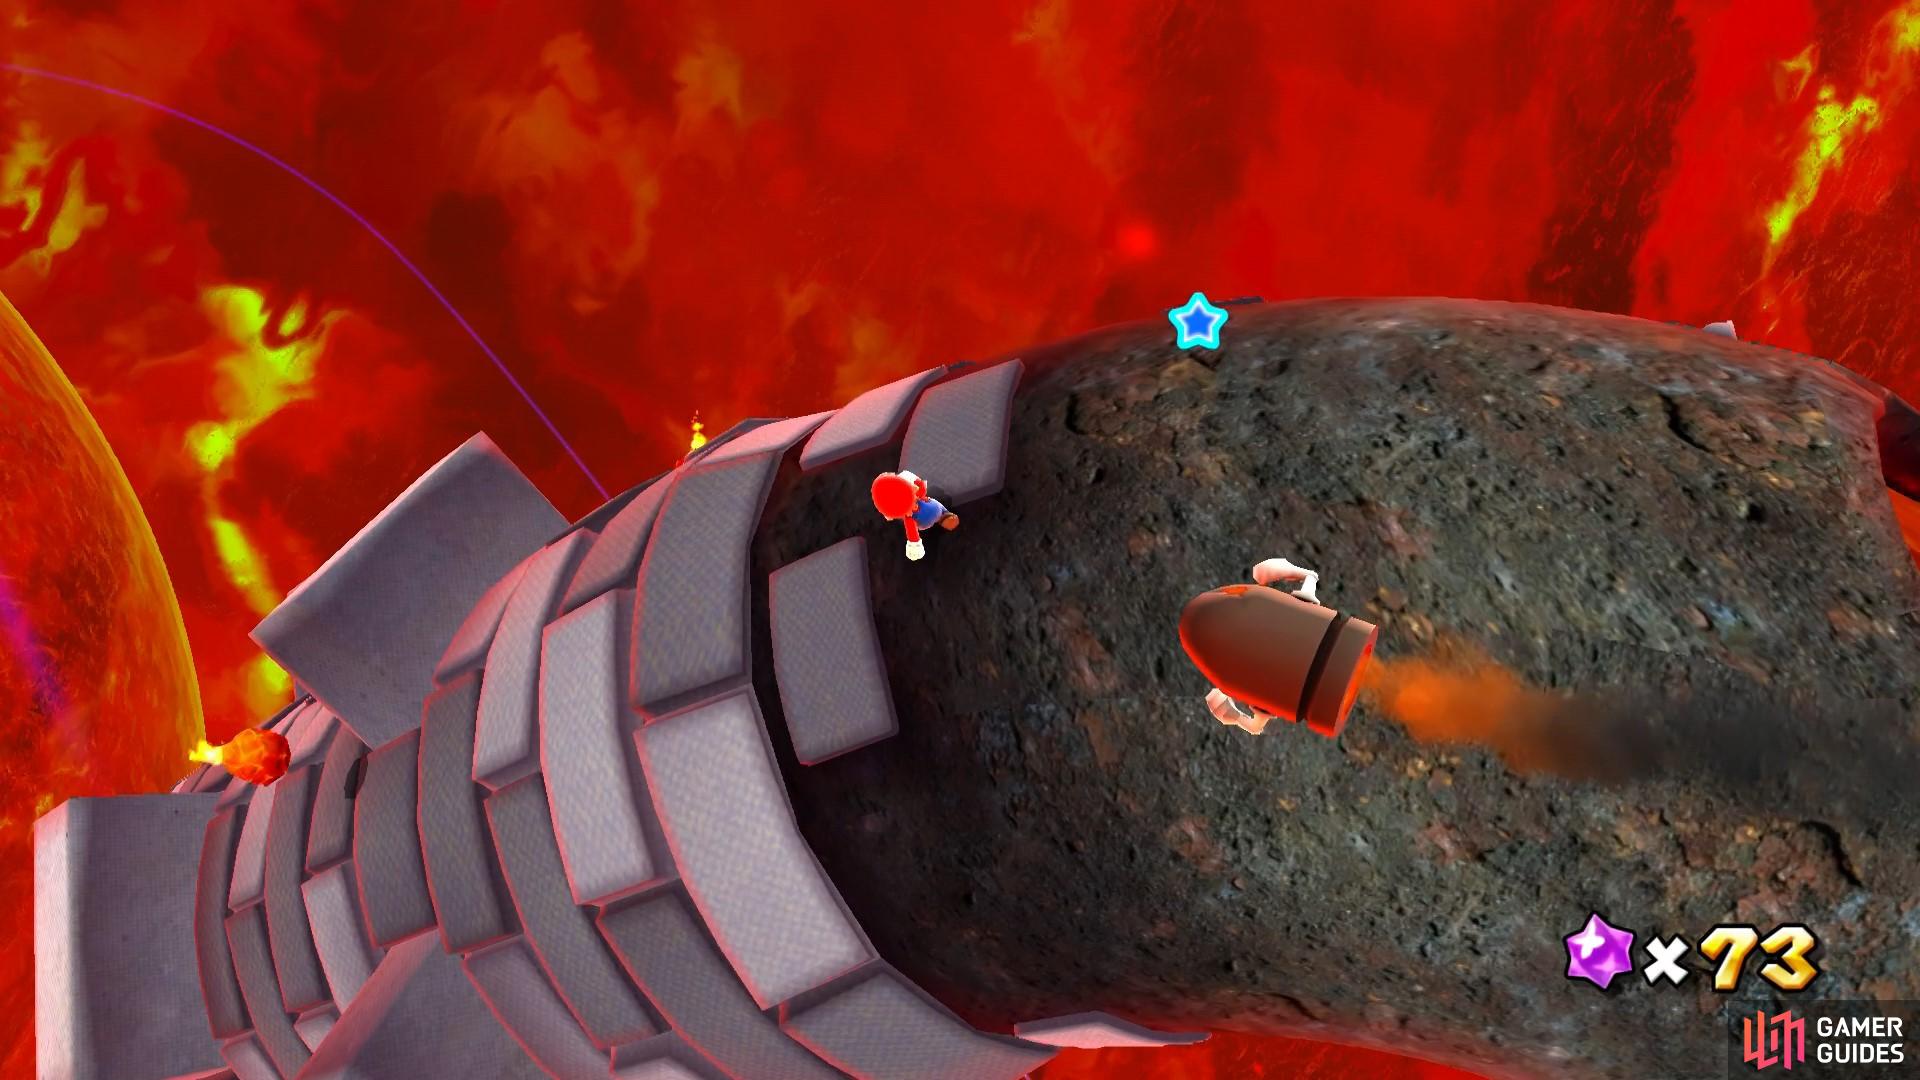 Guide the Bullet Bill to the otherside of the planet to smash the cage covering a Launch Star.